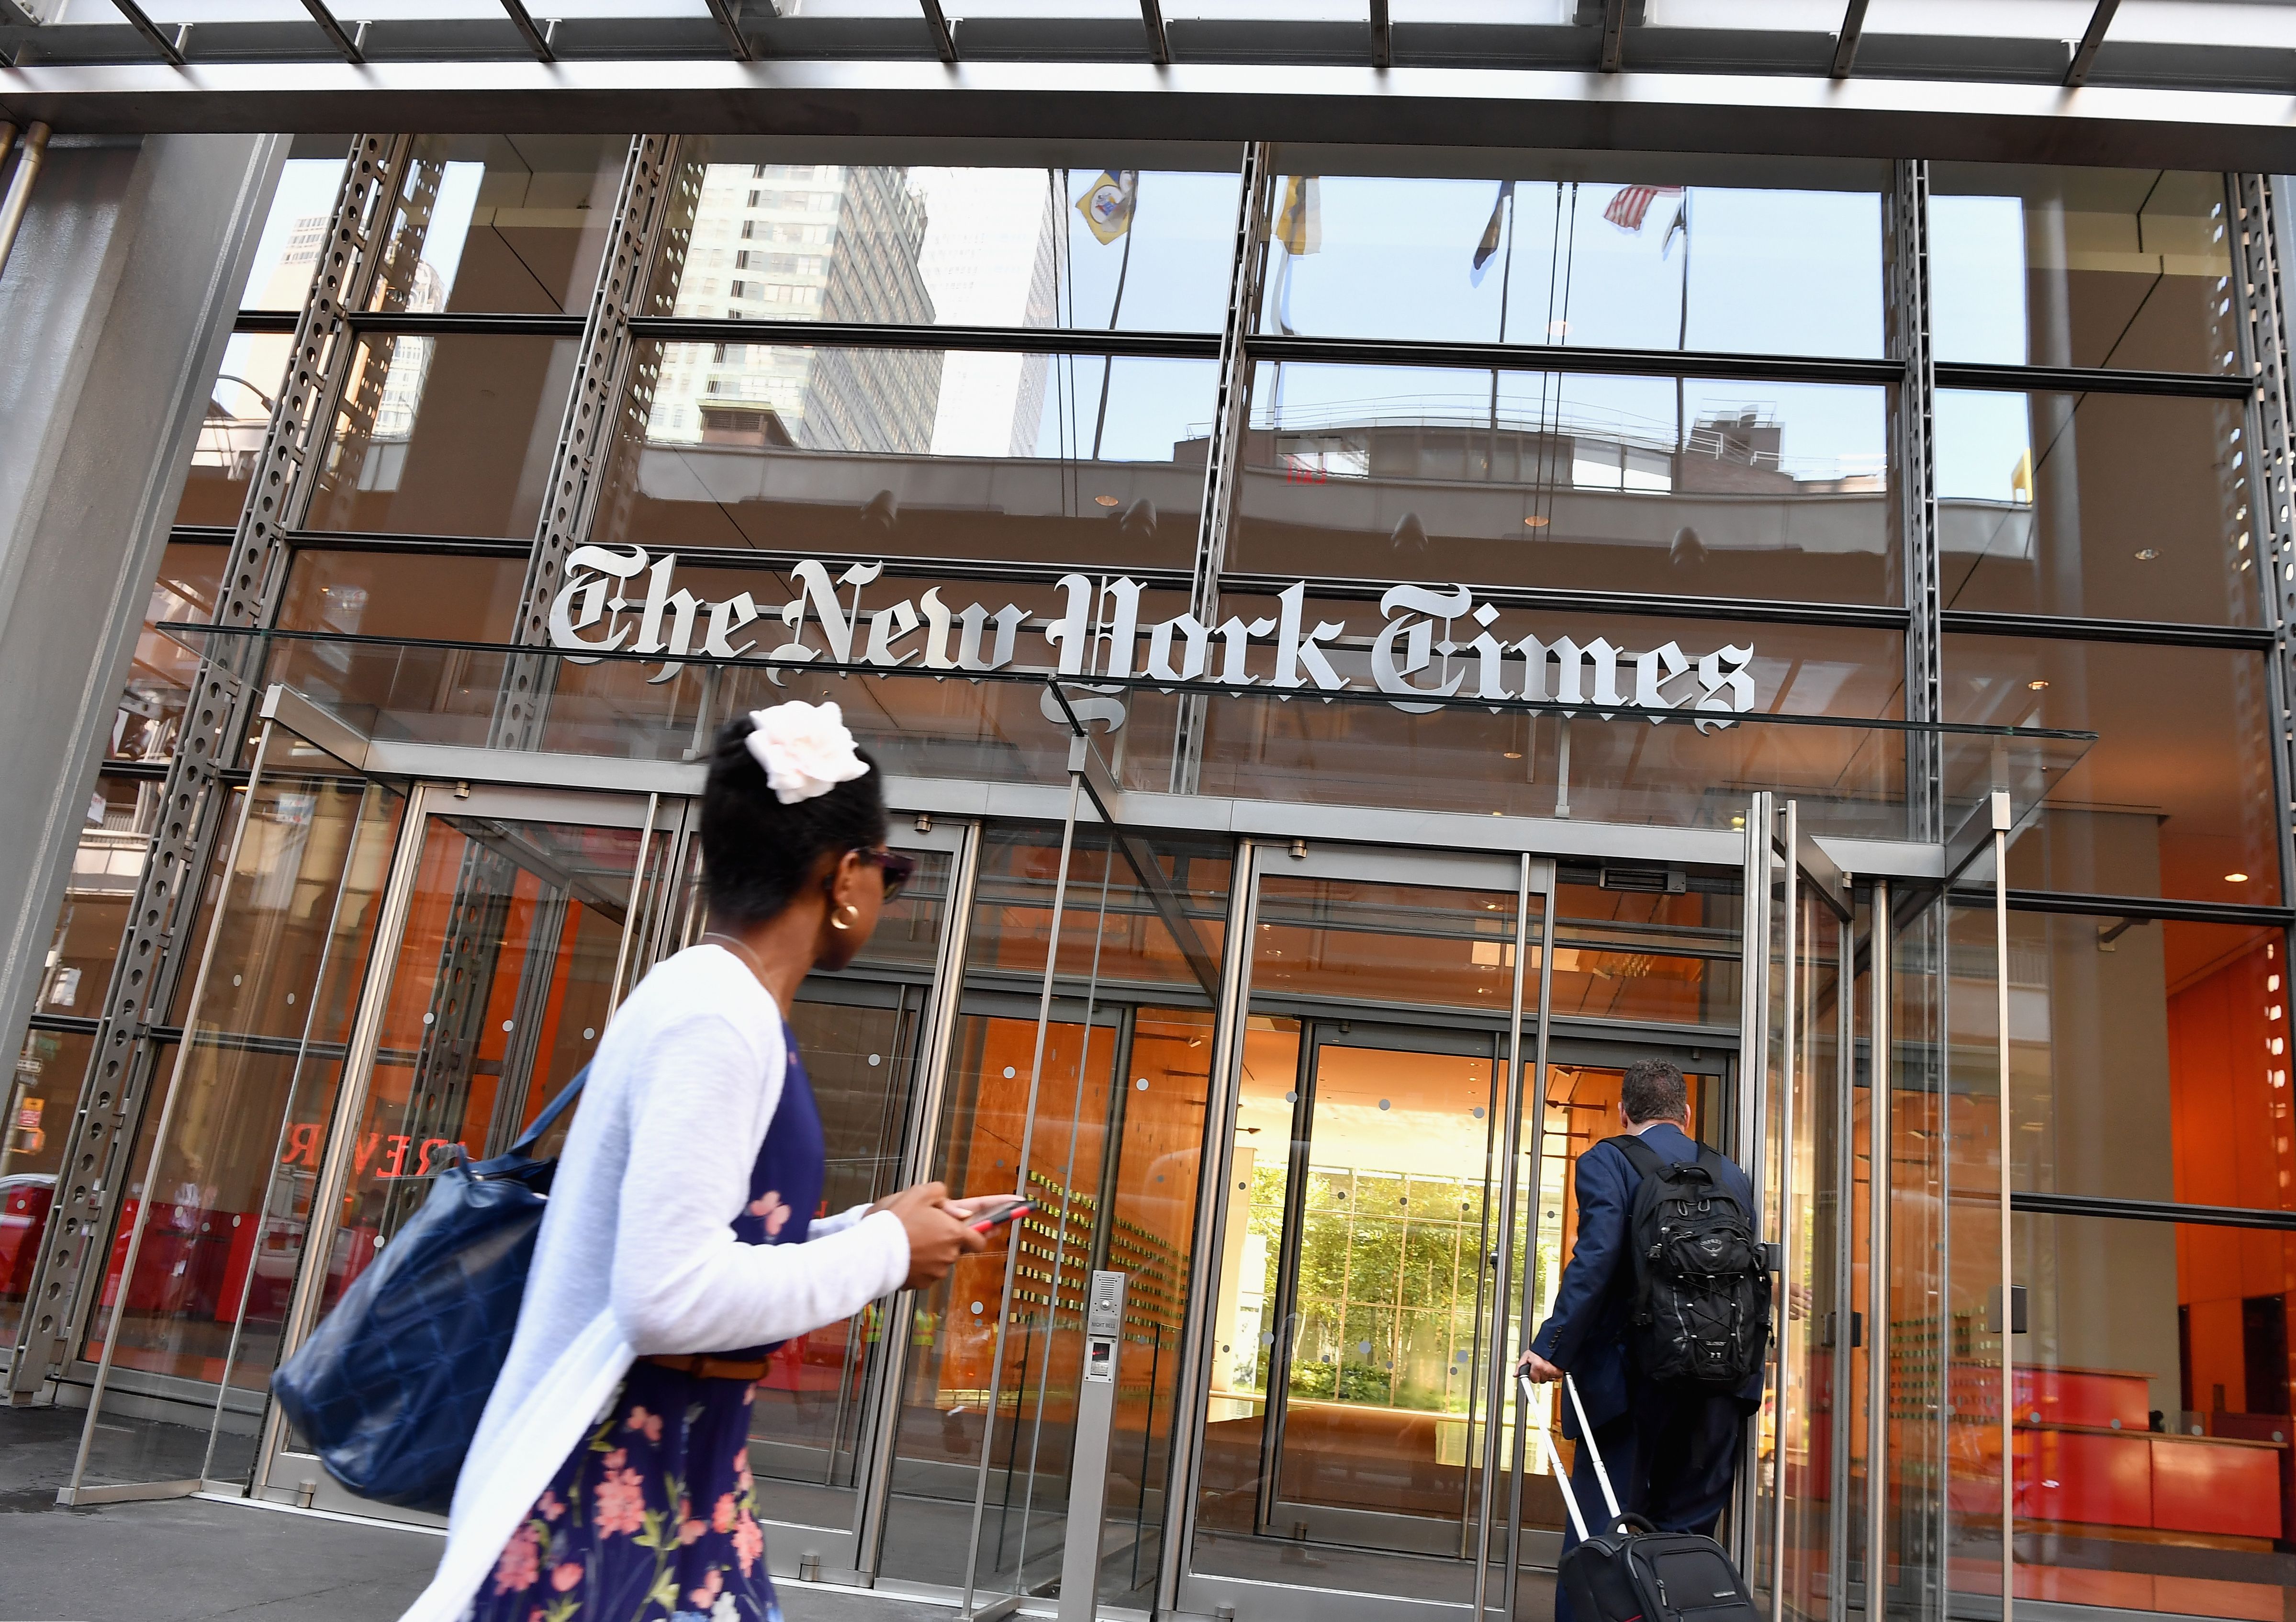 People walk by the front of the New York Times